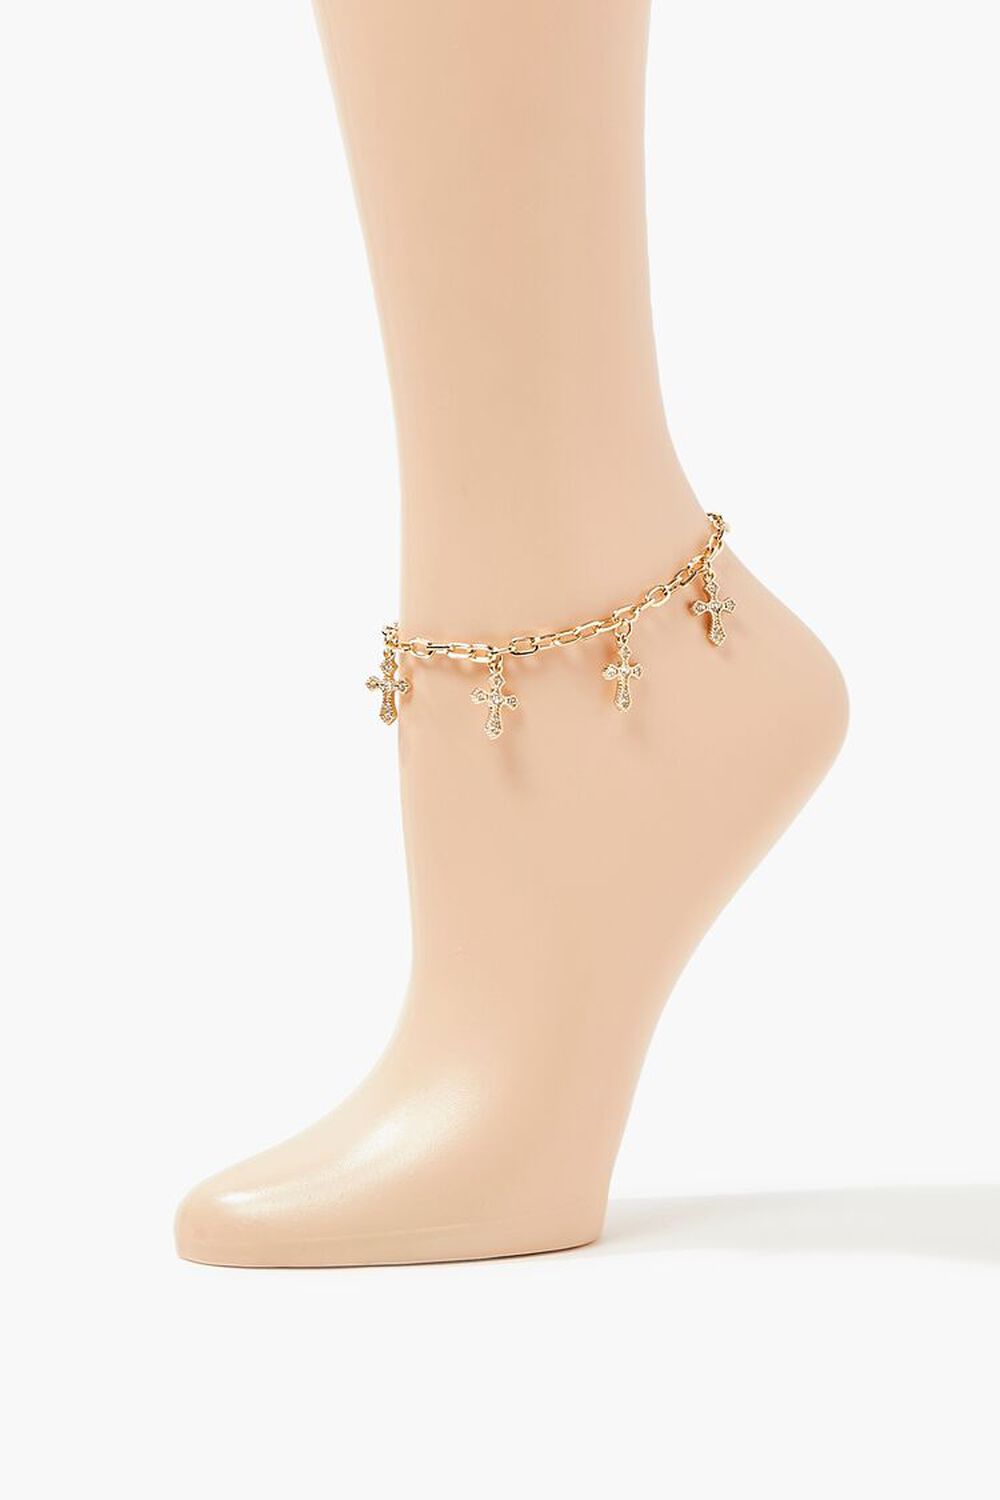 GOLD/CLEAR Rhinestone Cross Charm Anklet, image 1